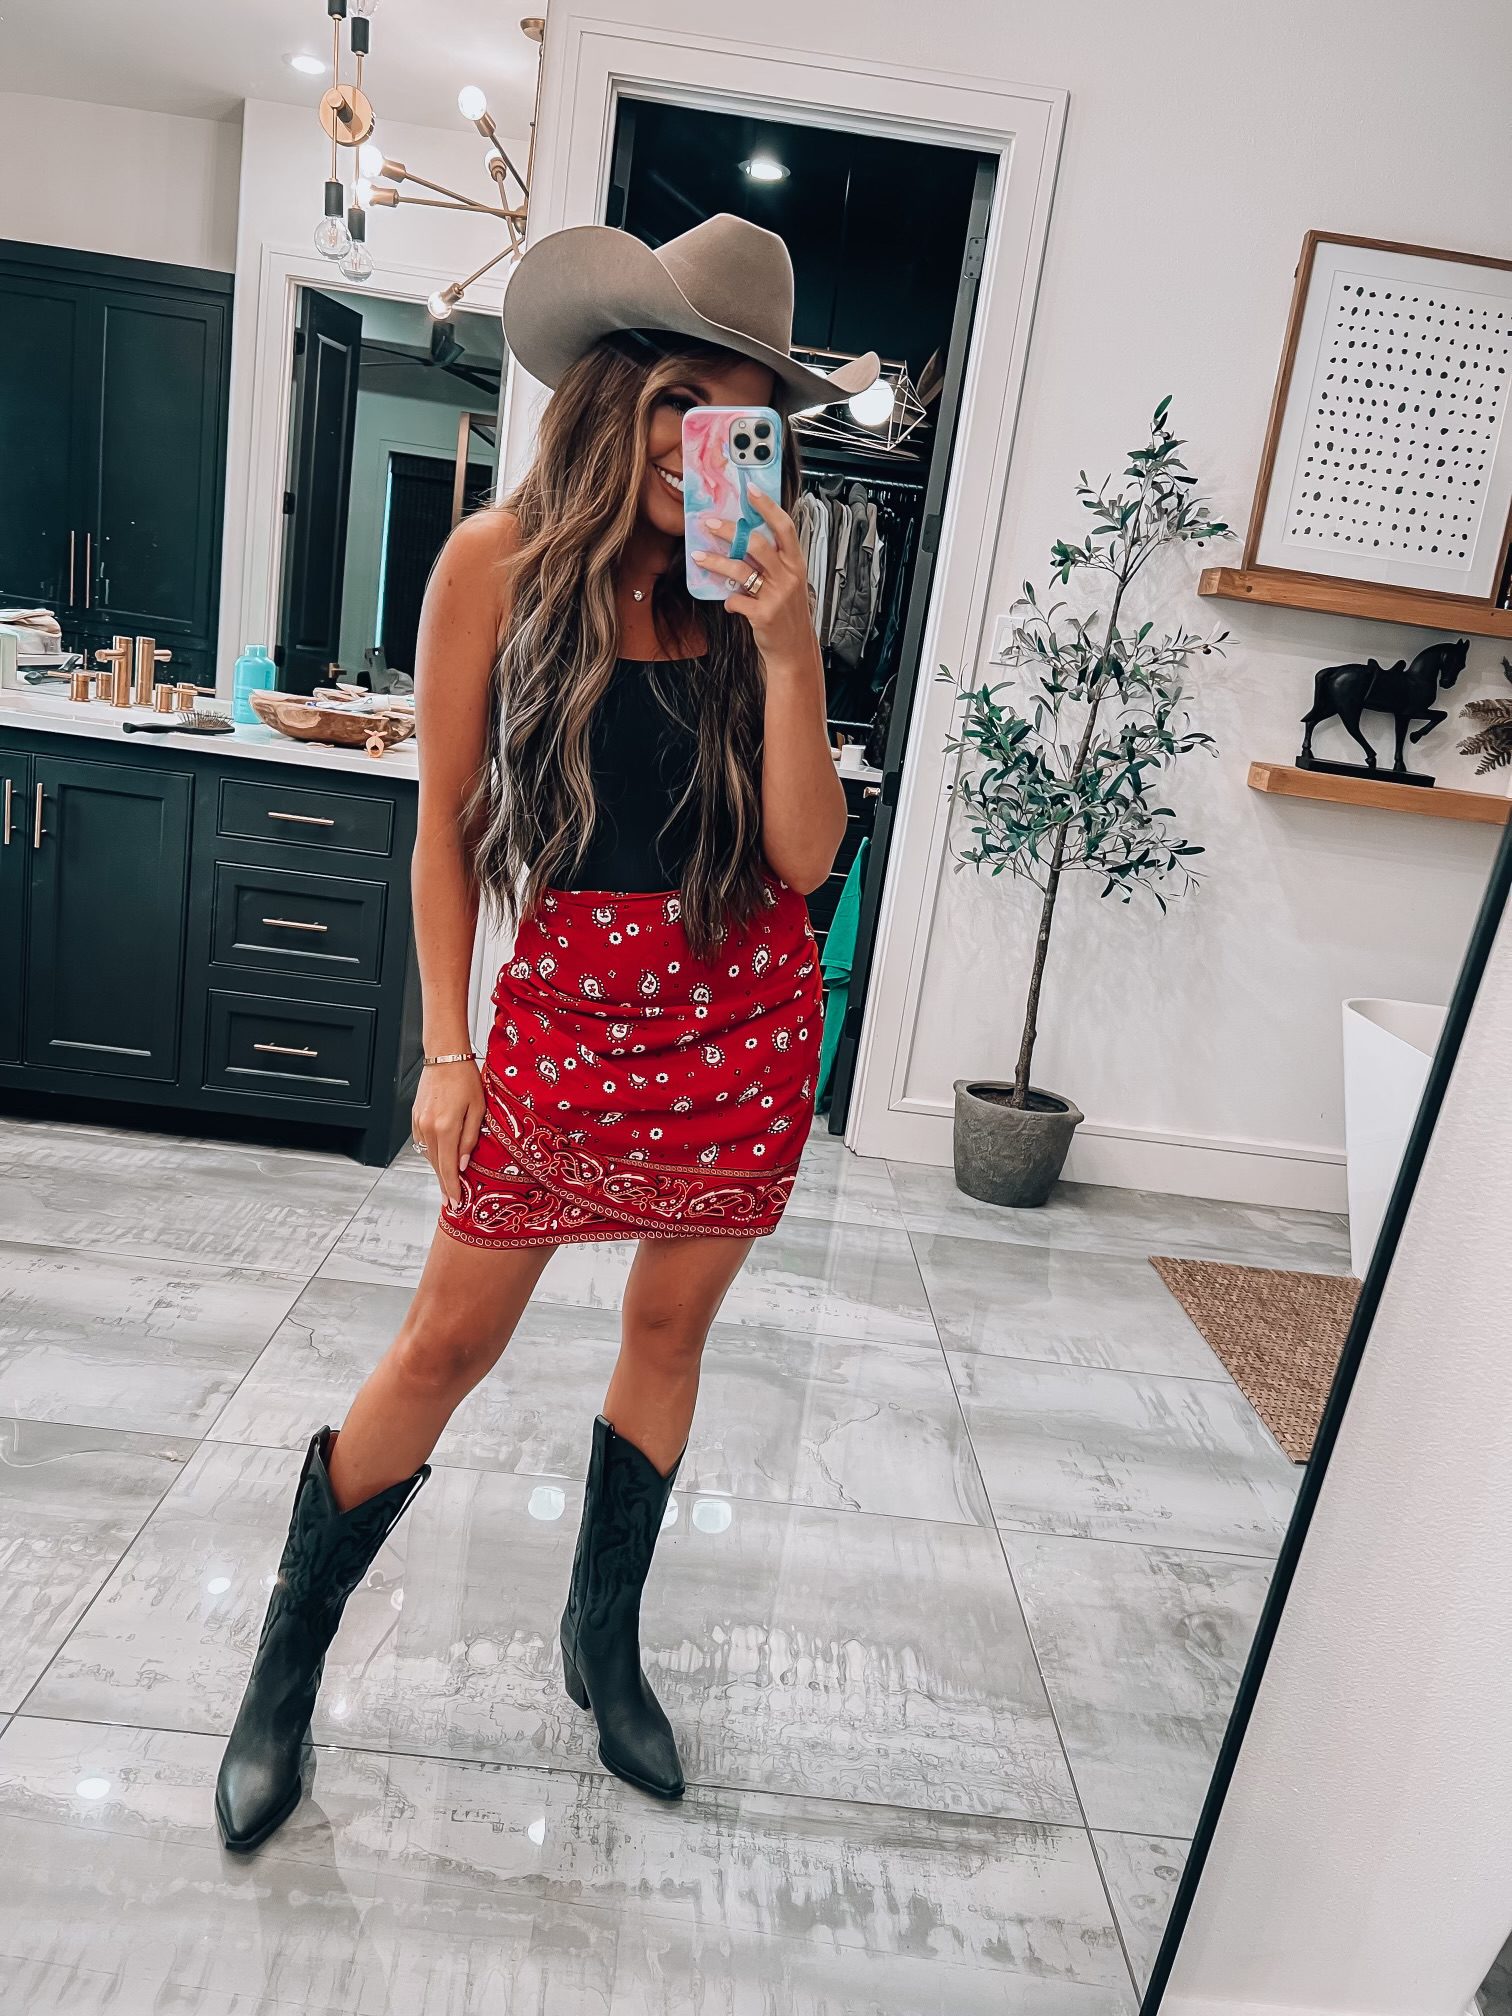 Concert Outfit Ideas Knee High Boots